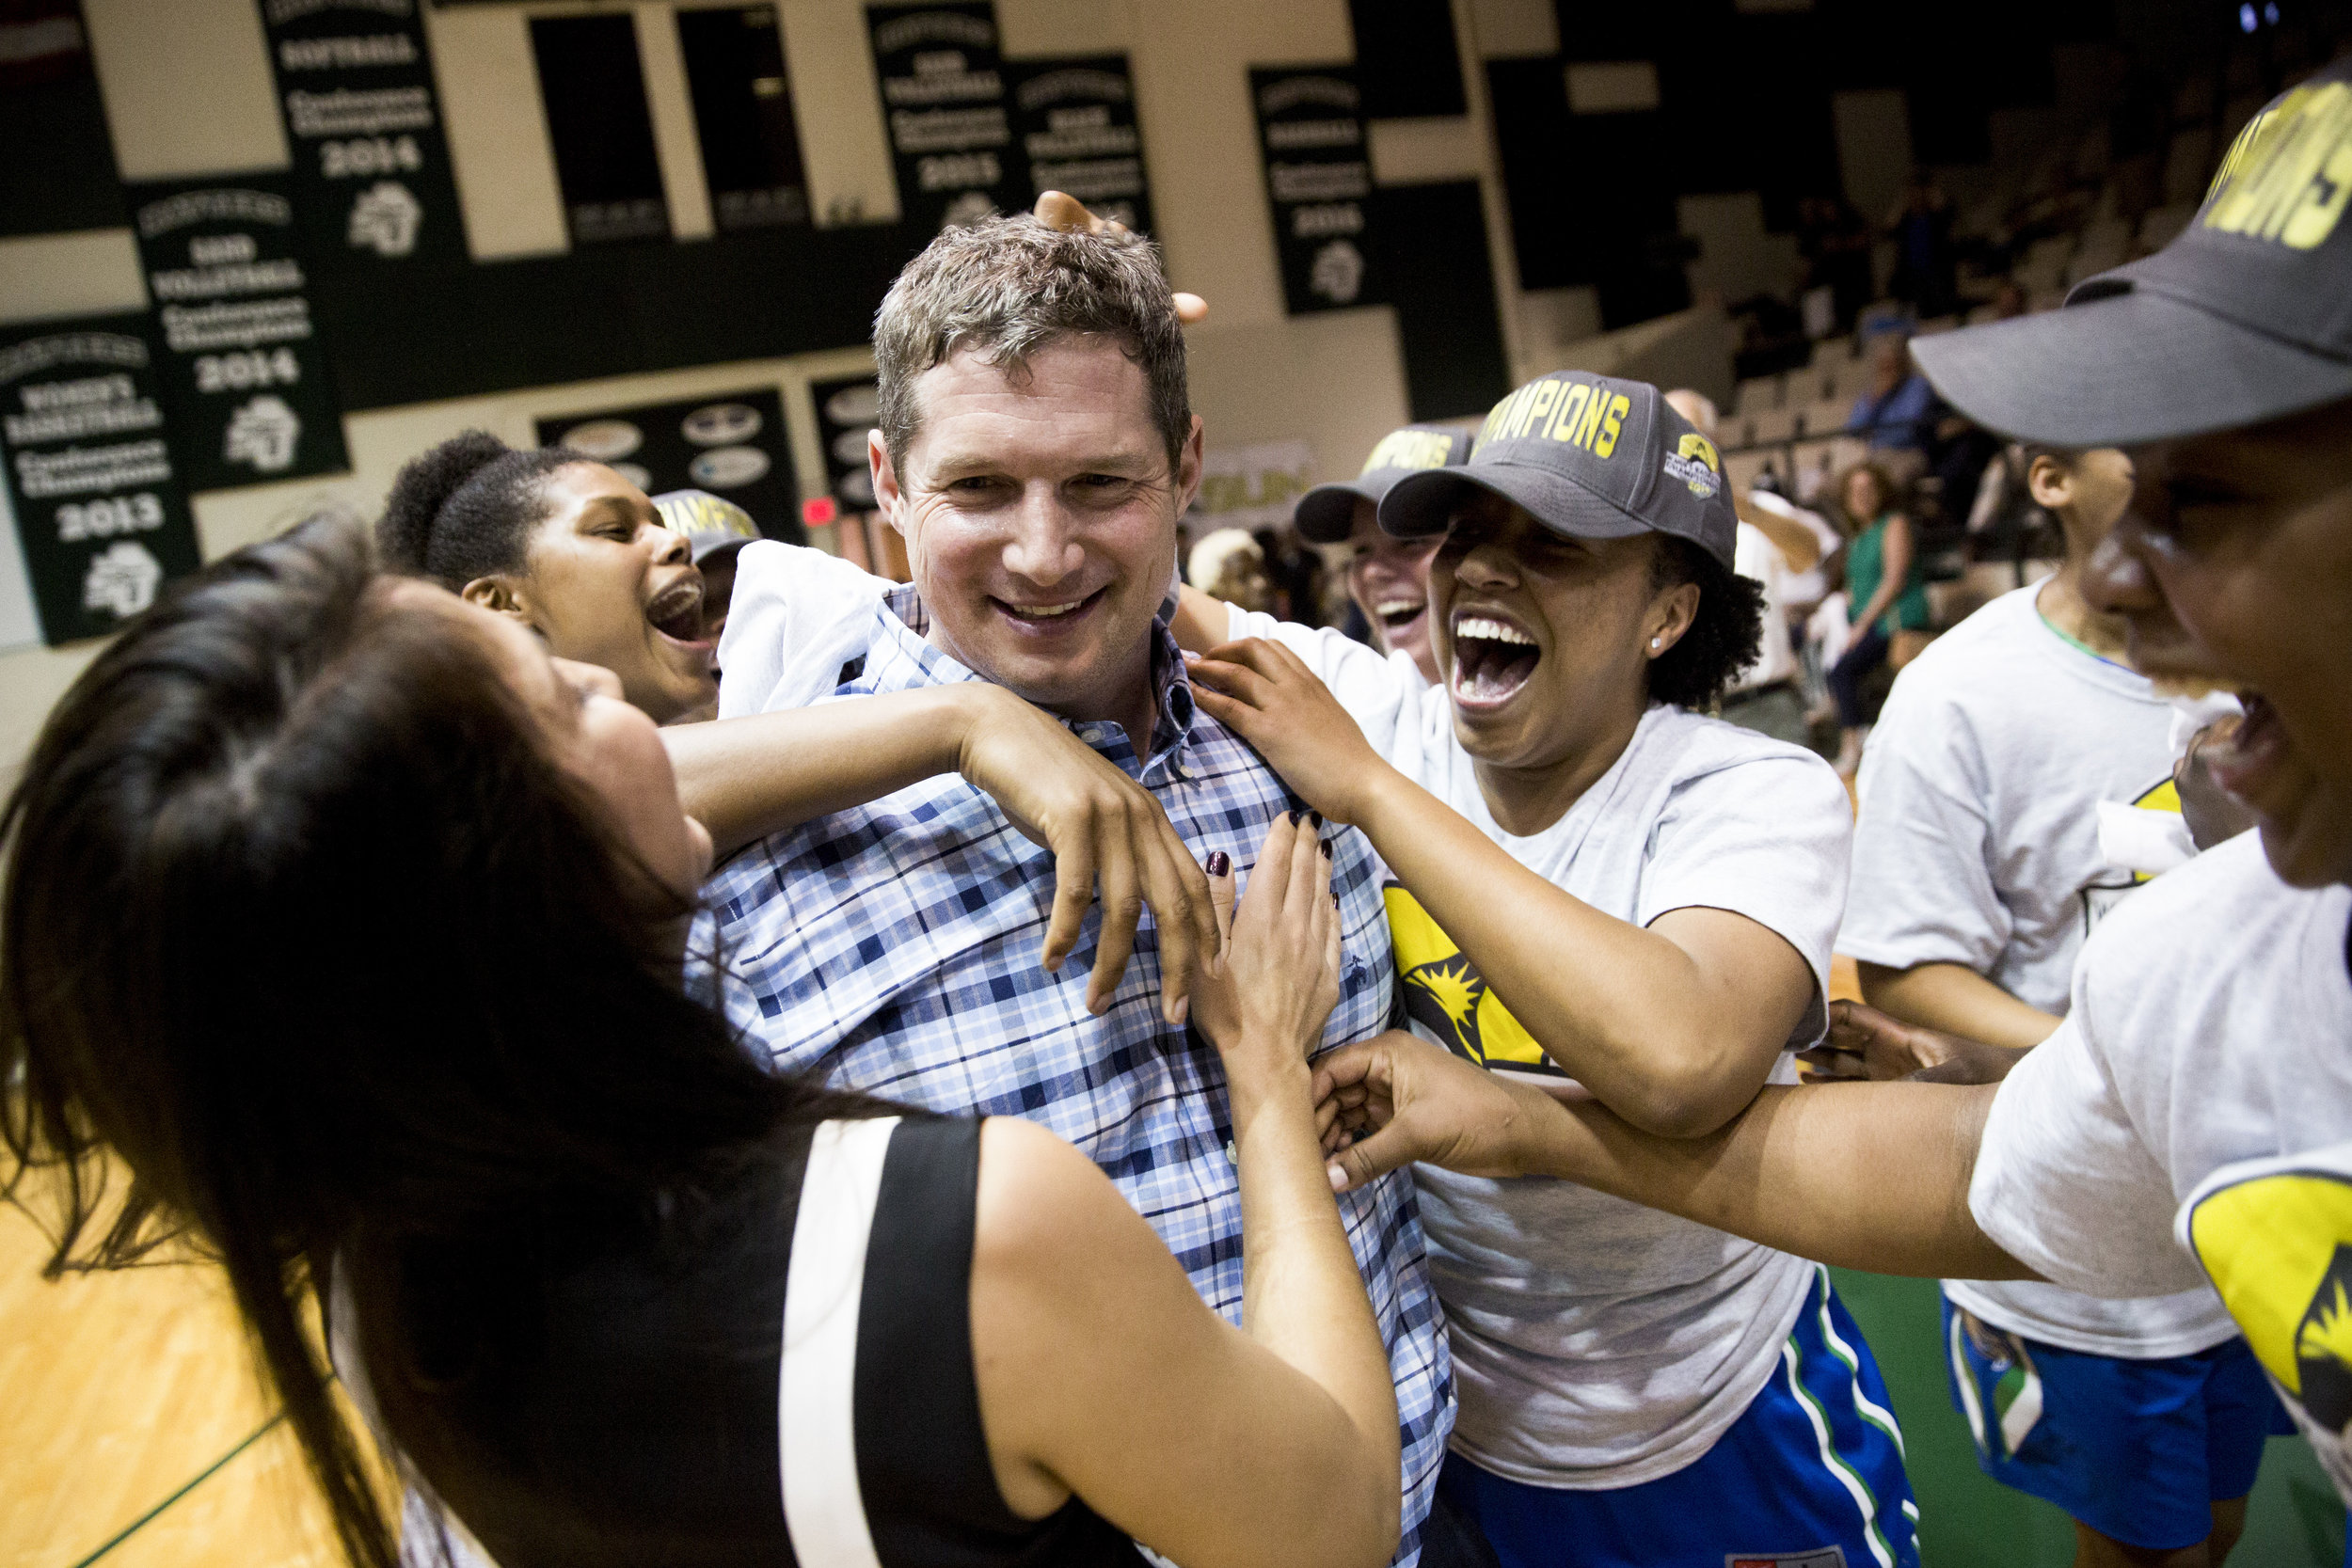  The FGCU women's team swarms head coach Karl Smesko after defeating Stetson 77-70 in the Atlantic Sun Championship game at the Edmunds Center Sunday, March 12, 2017 in DeLand, Fla. 